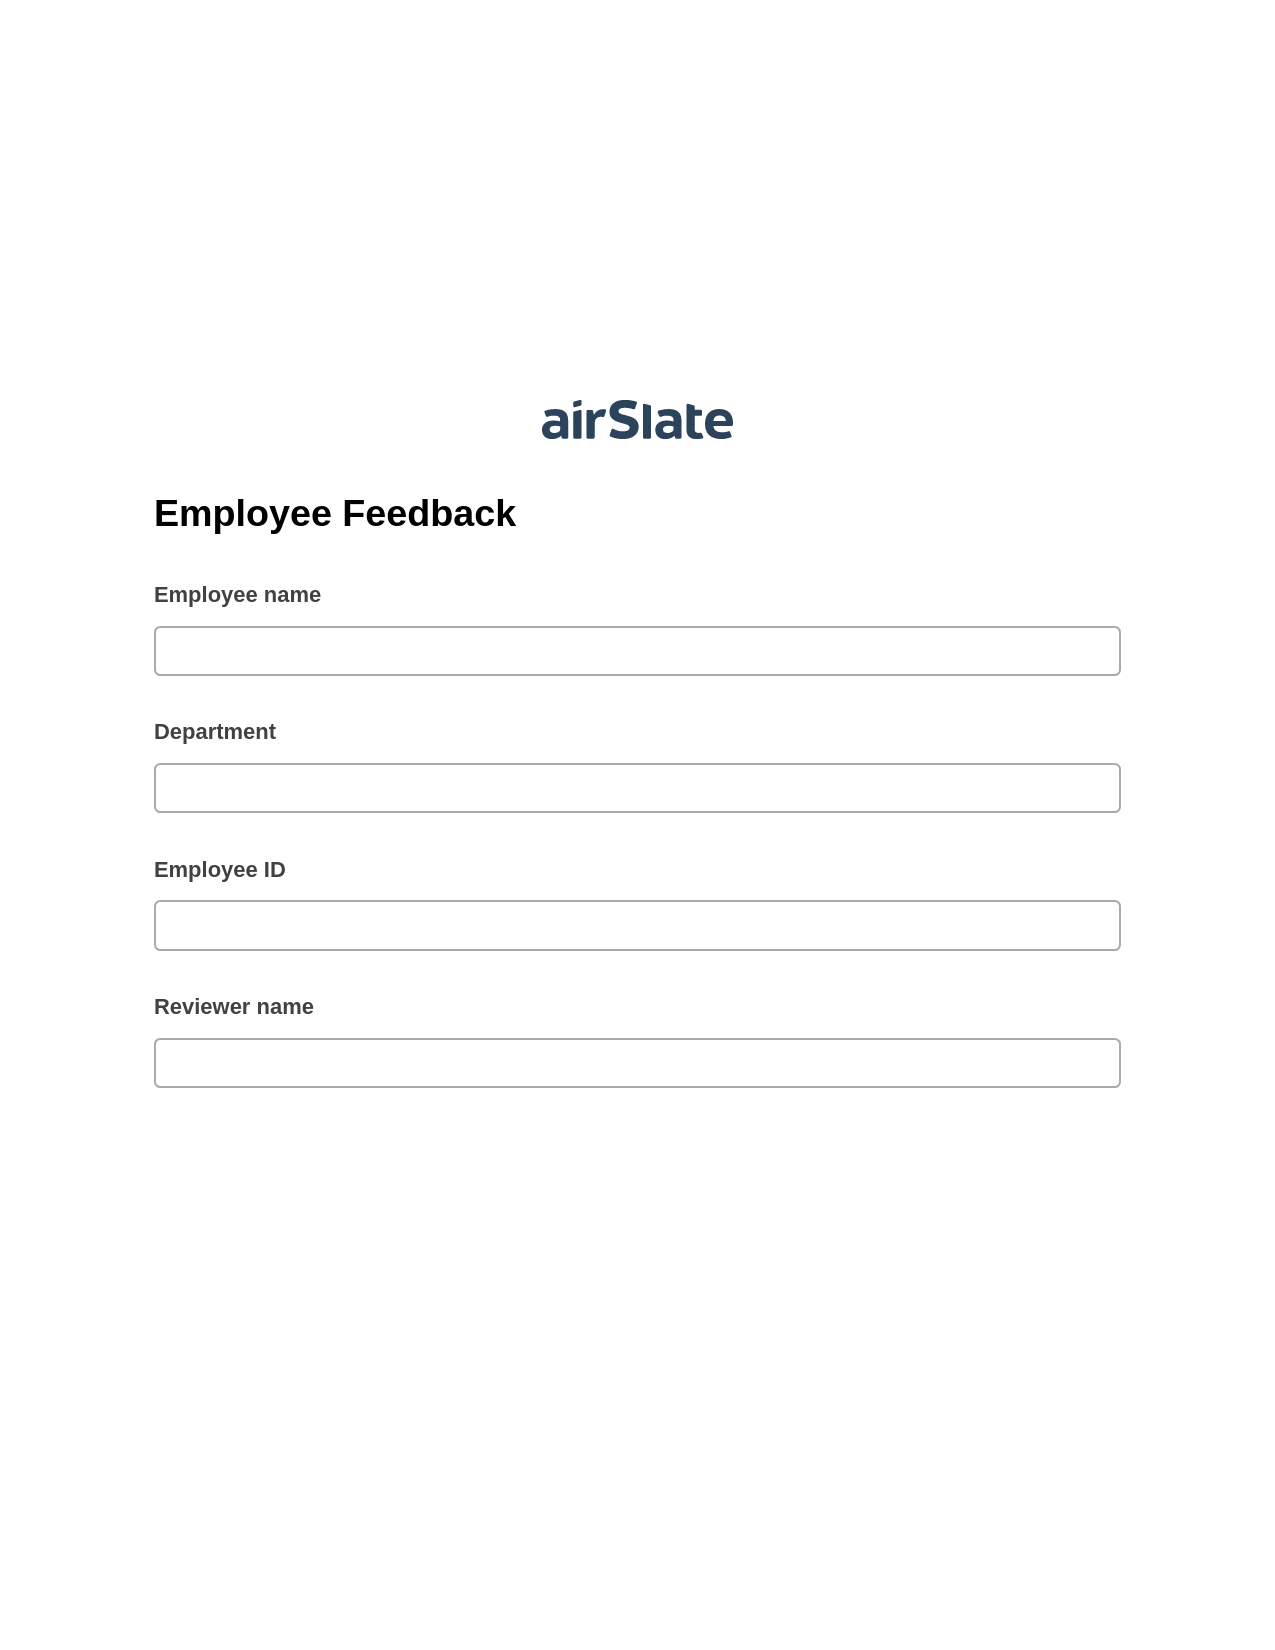 Employee Feedback Pre-fill from NetSuite Records Bot, In-person Signing Bot, Archive to SharePoint Folder Bot